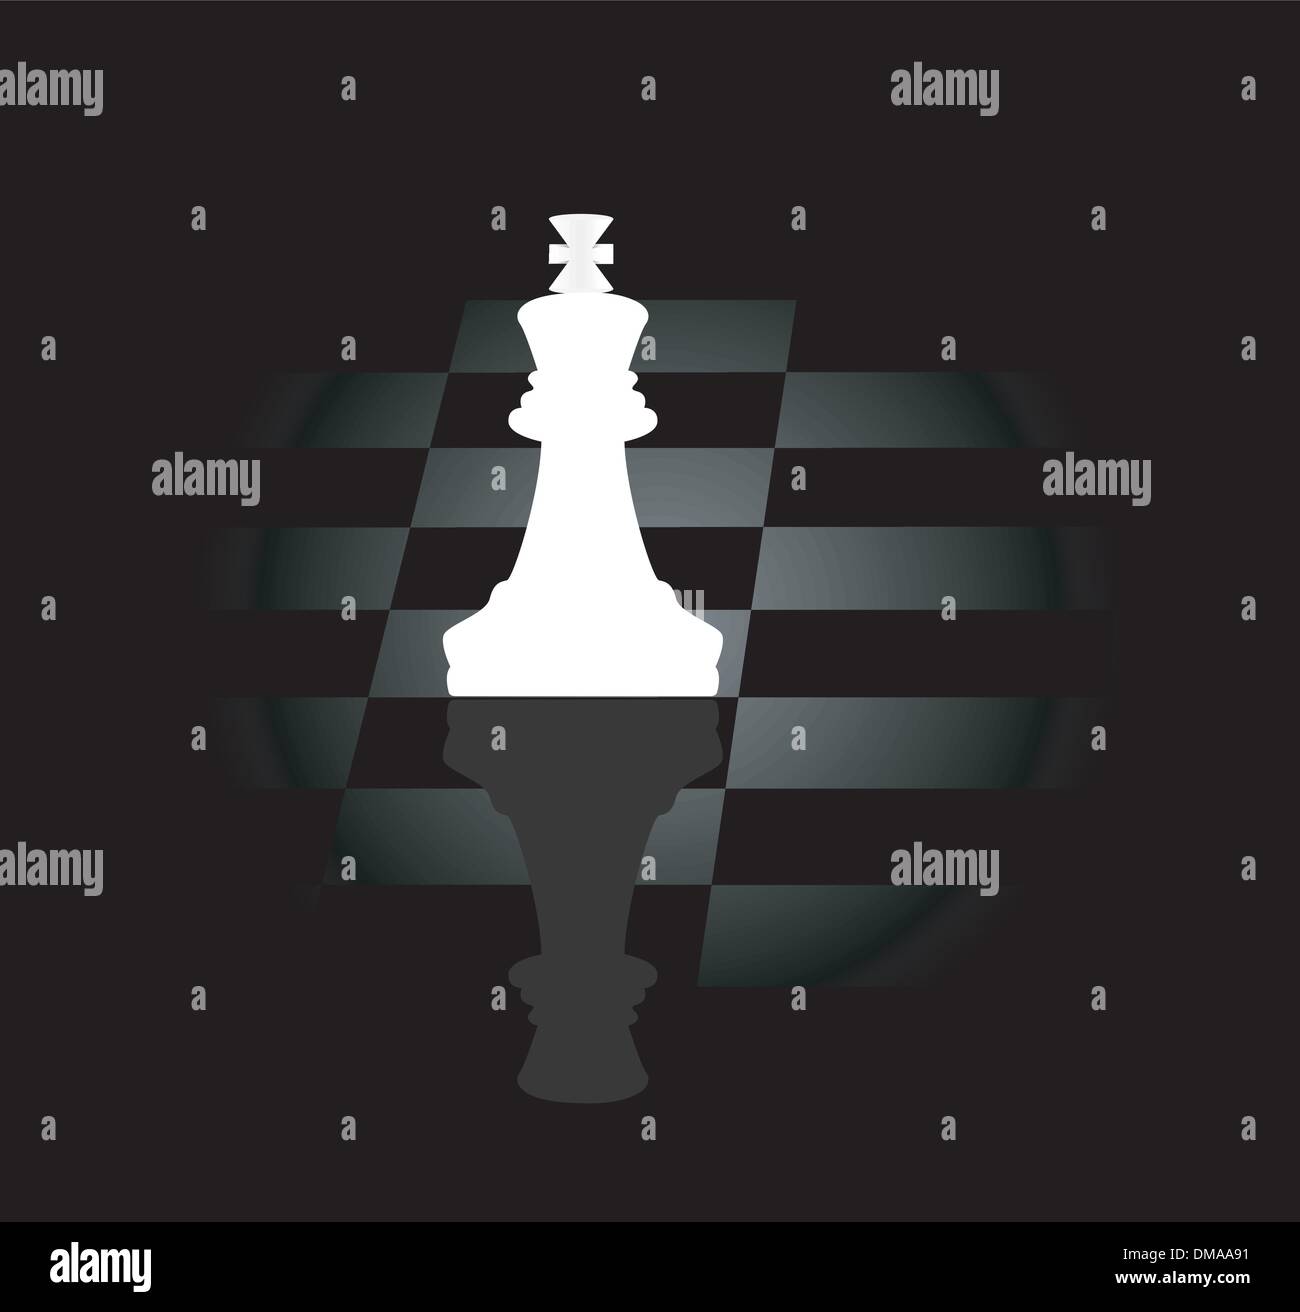 pawn and king Stock Vector